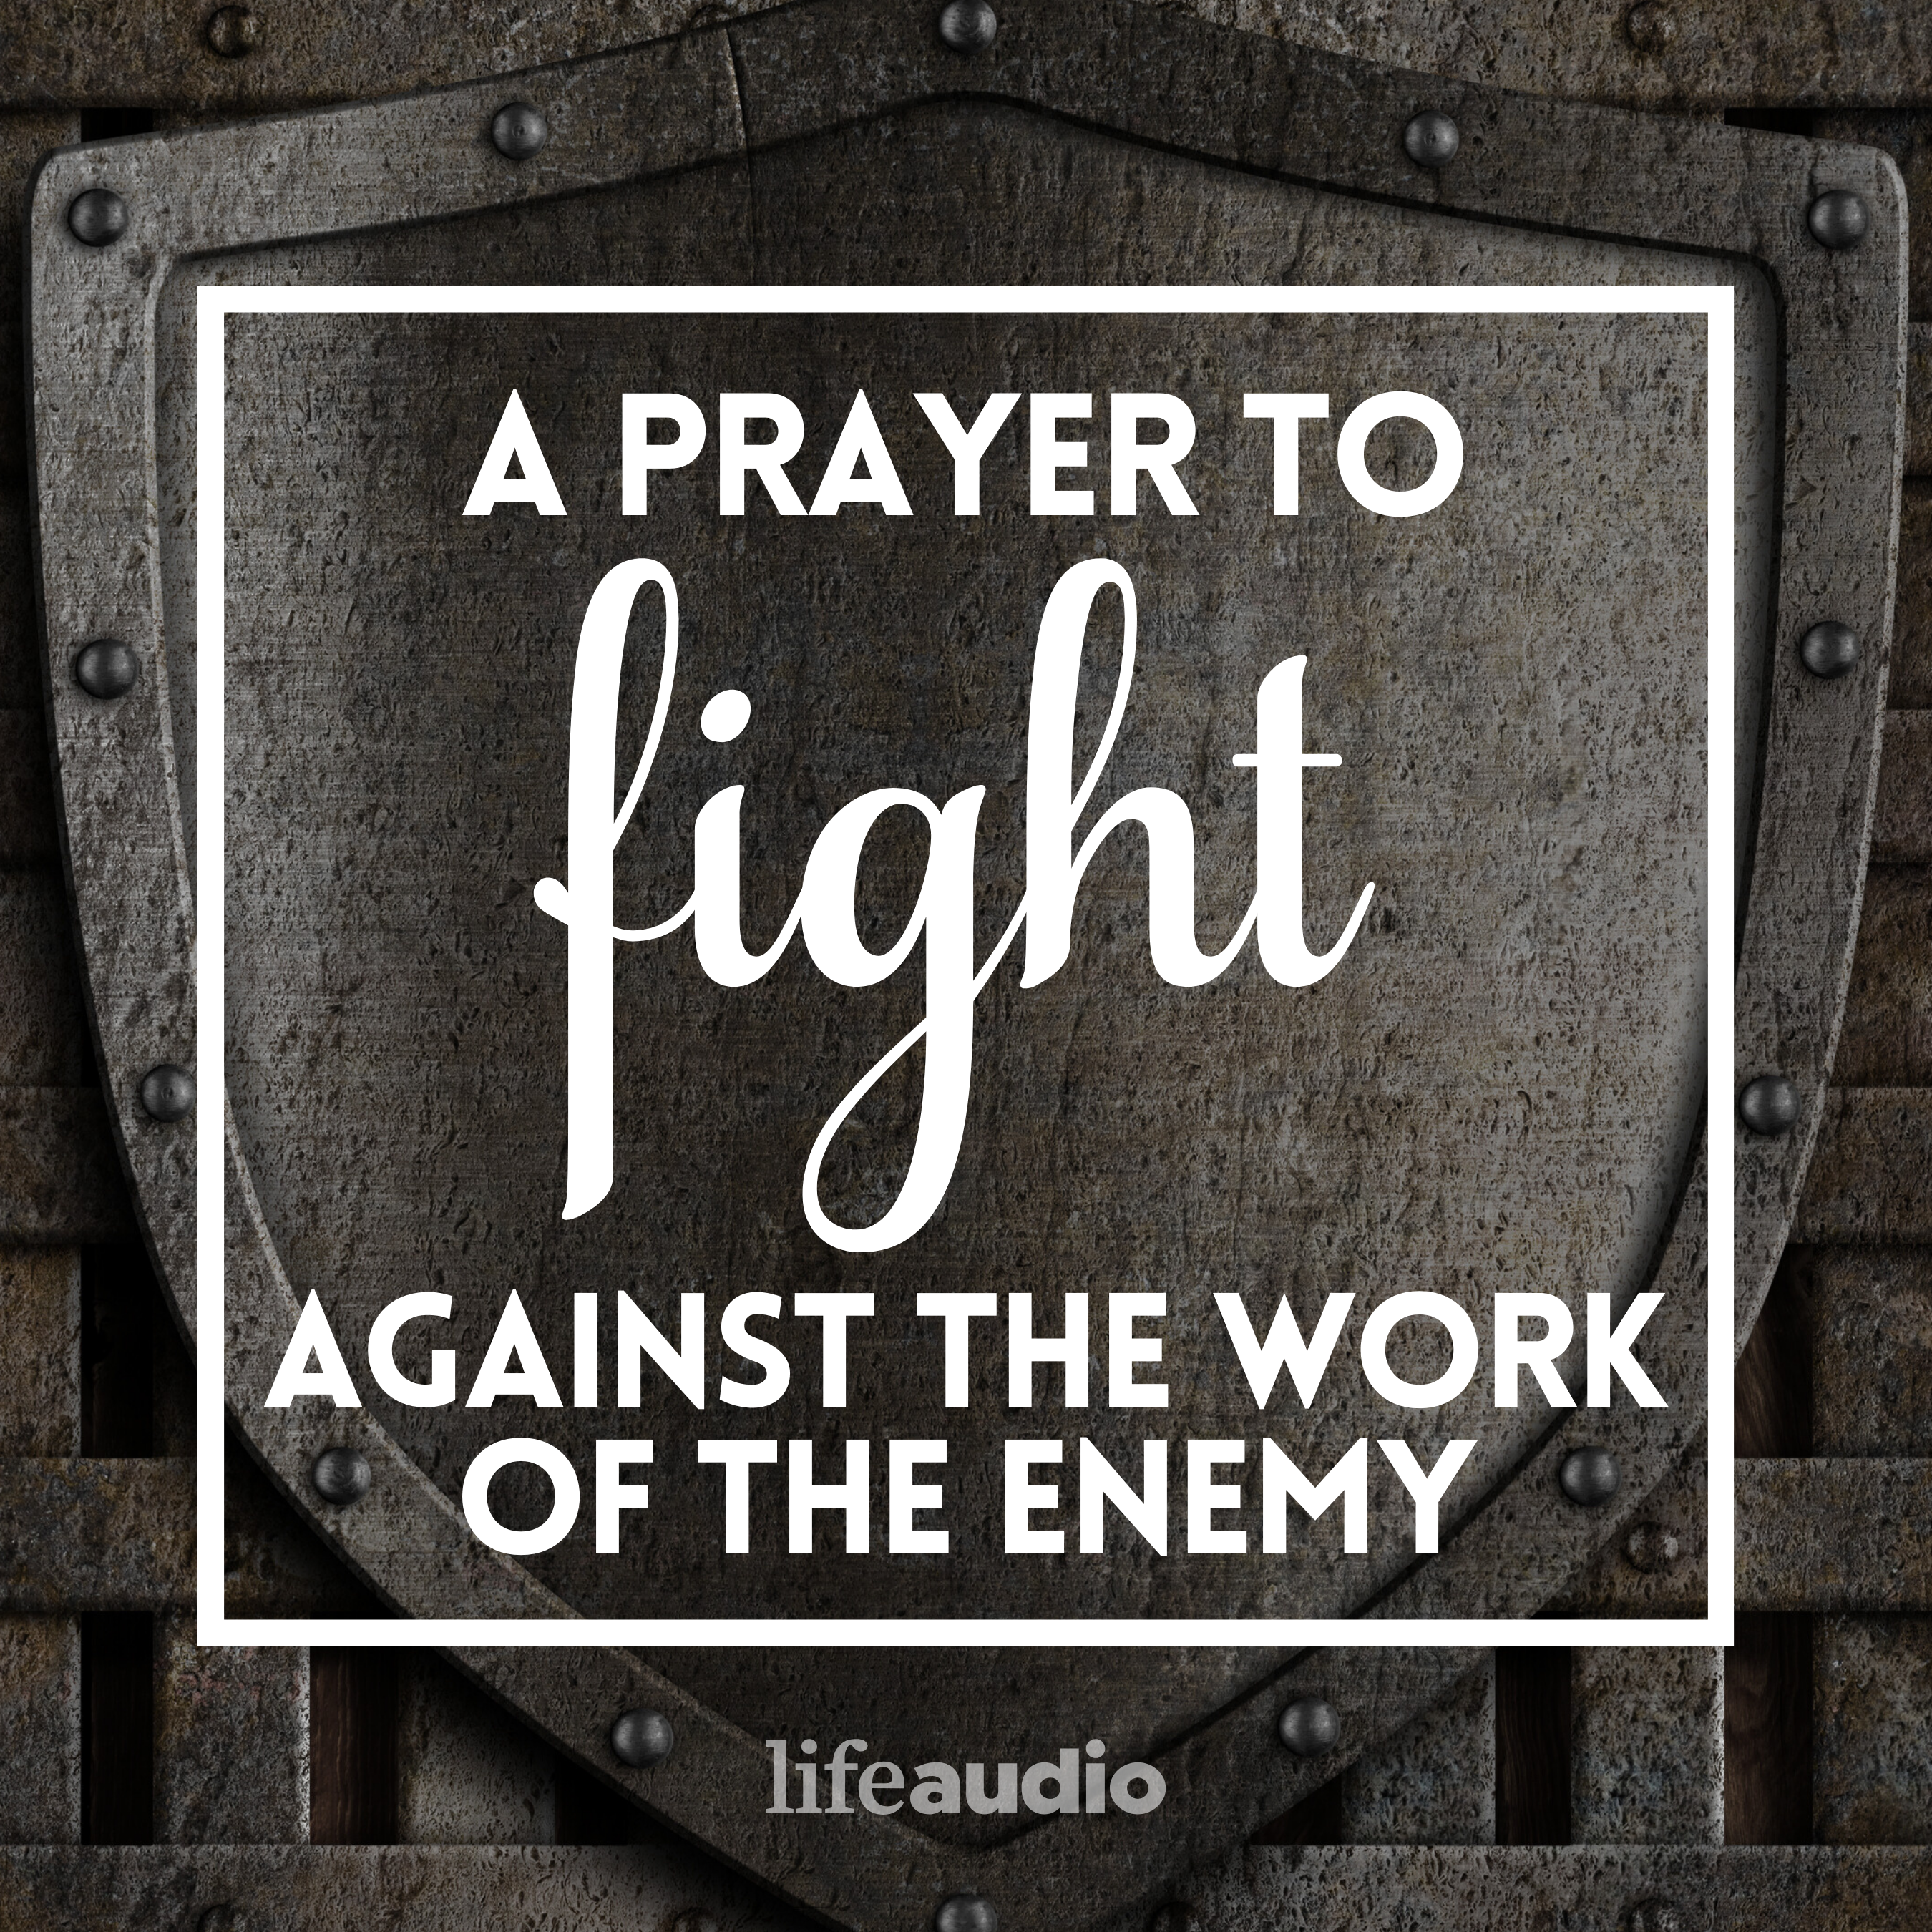 A Prayer to Fight against the Work of the Enemy